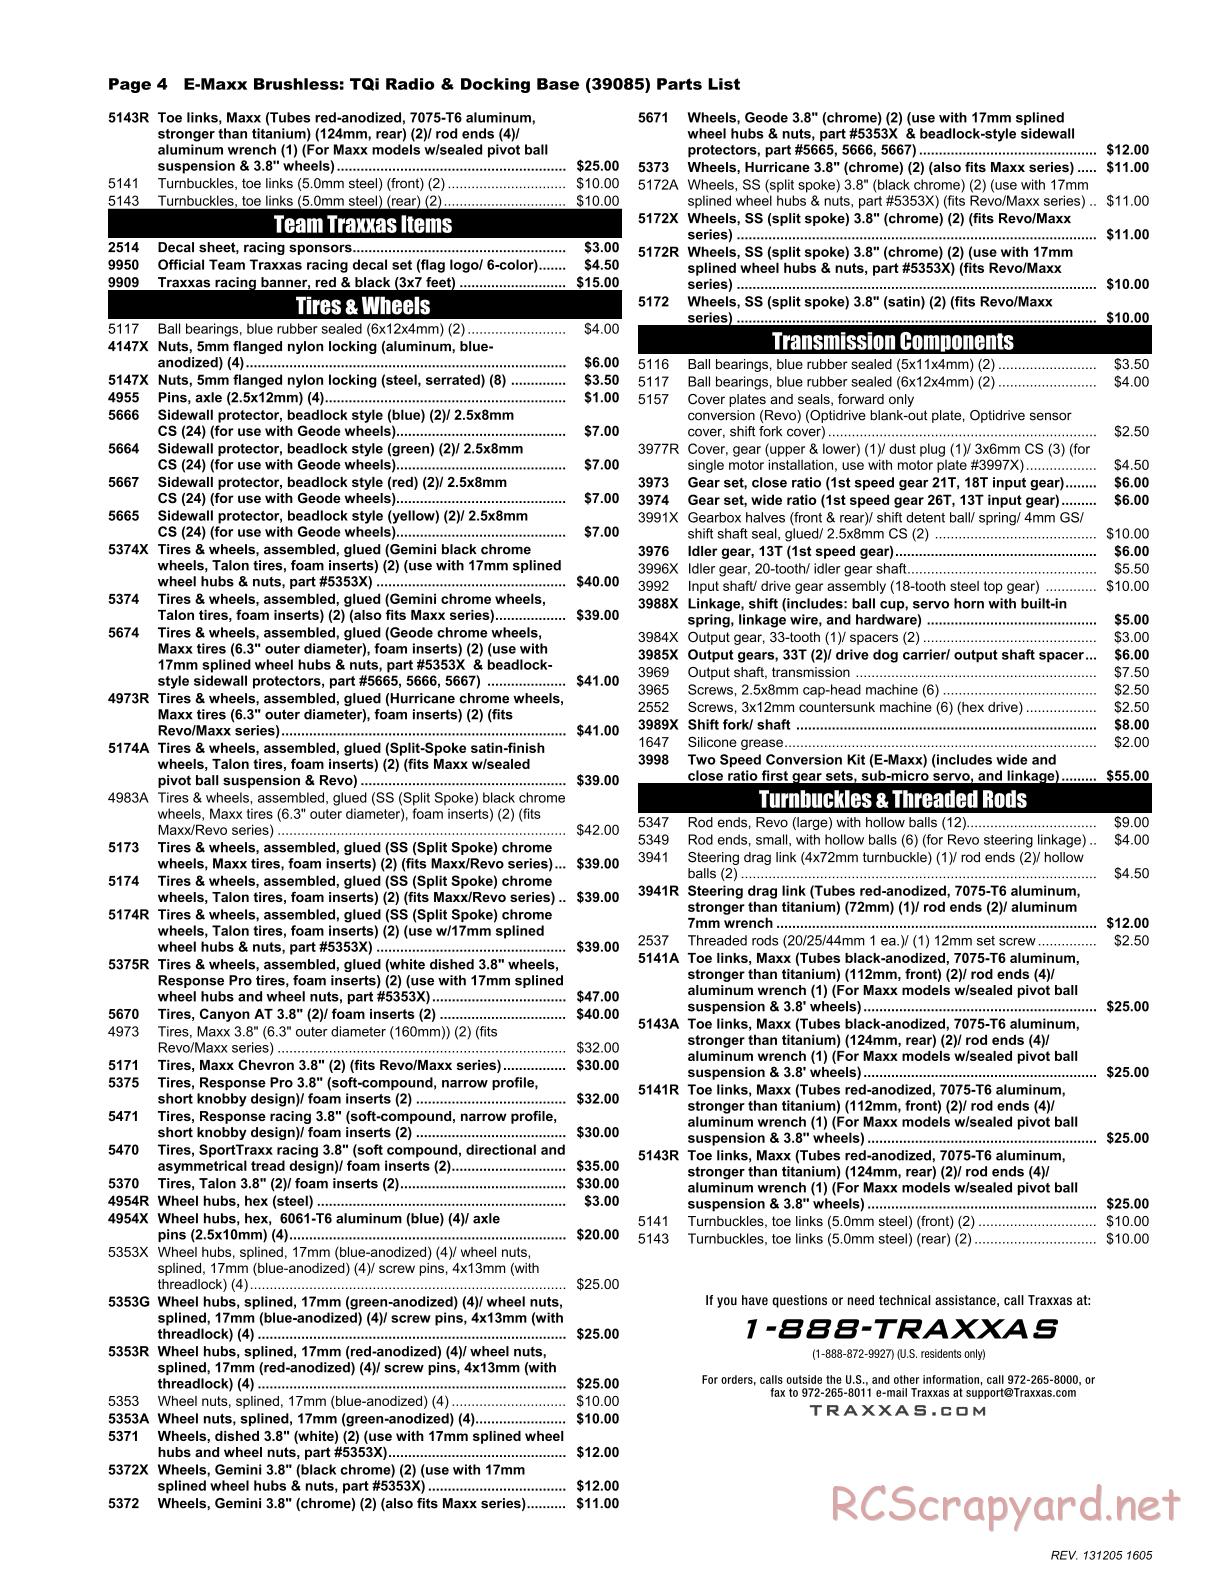 Traxxas - E-Maxx Brushless (2014) - Parts List - Page 4